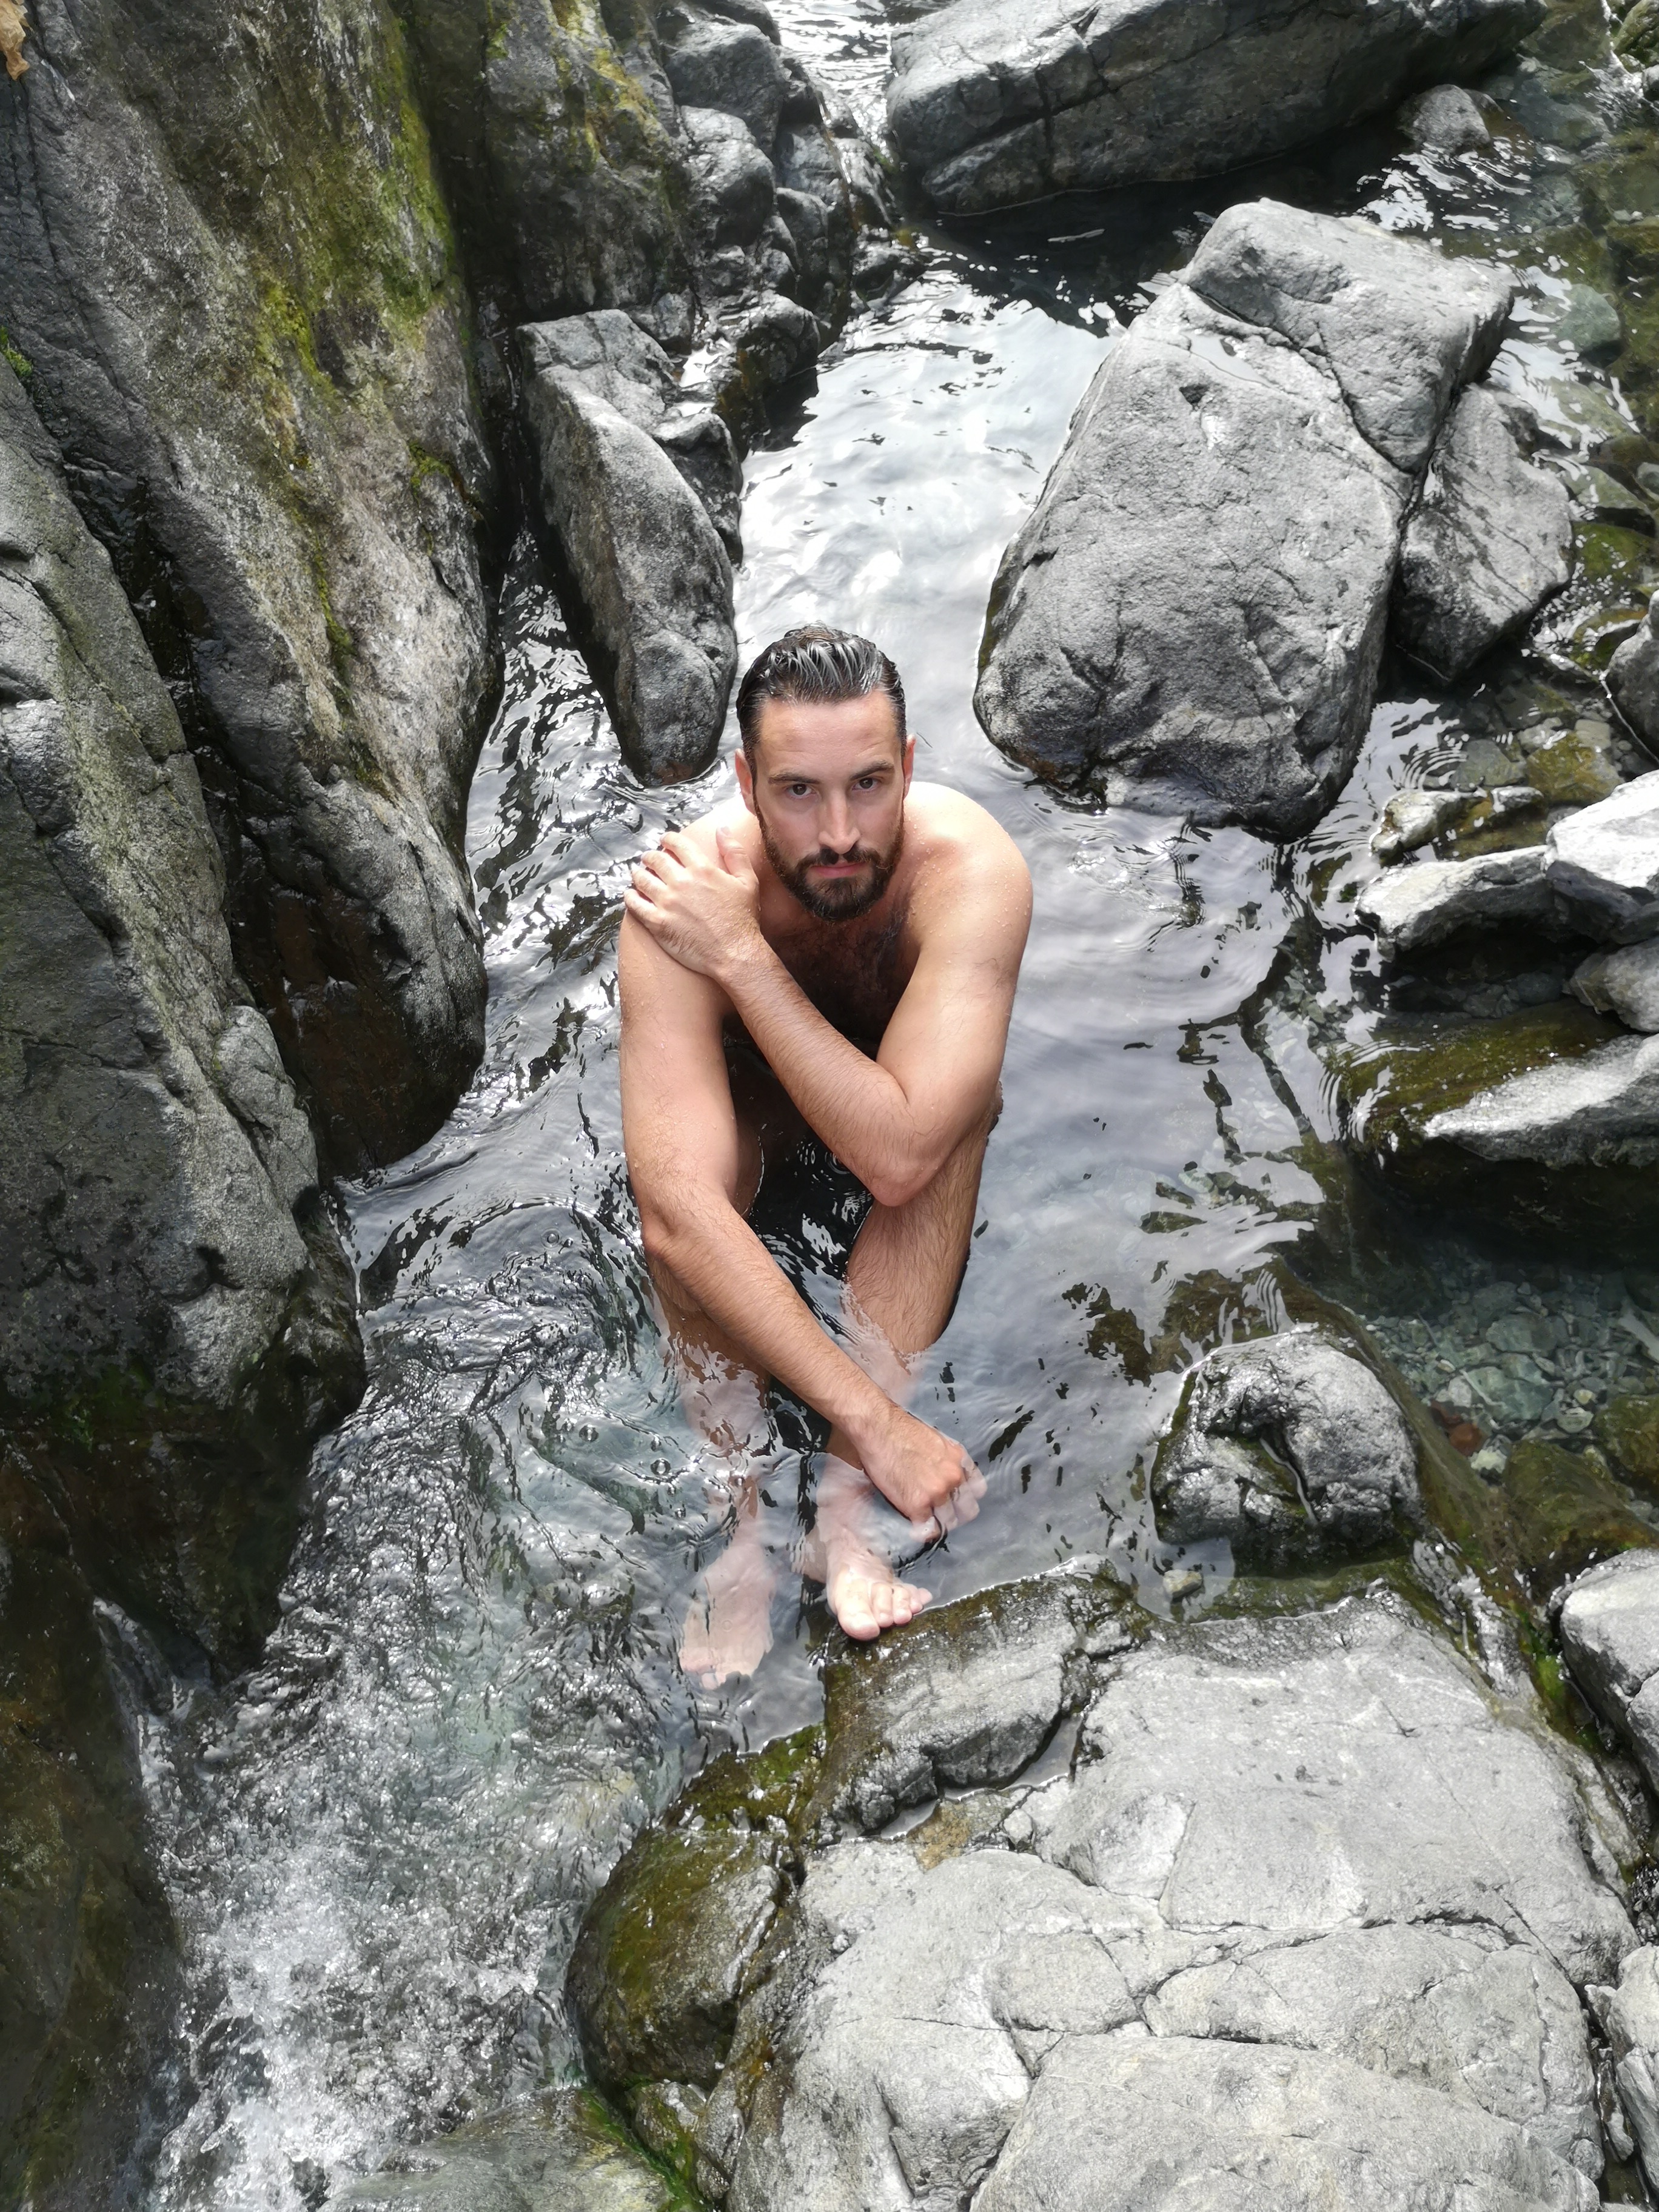 Hot Springs in Tofino with Jamies Whaling